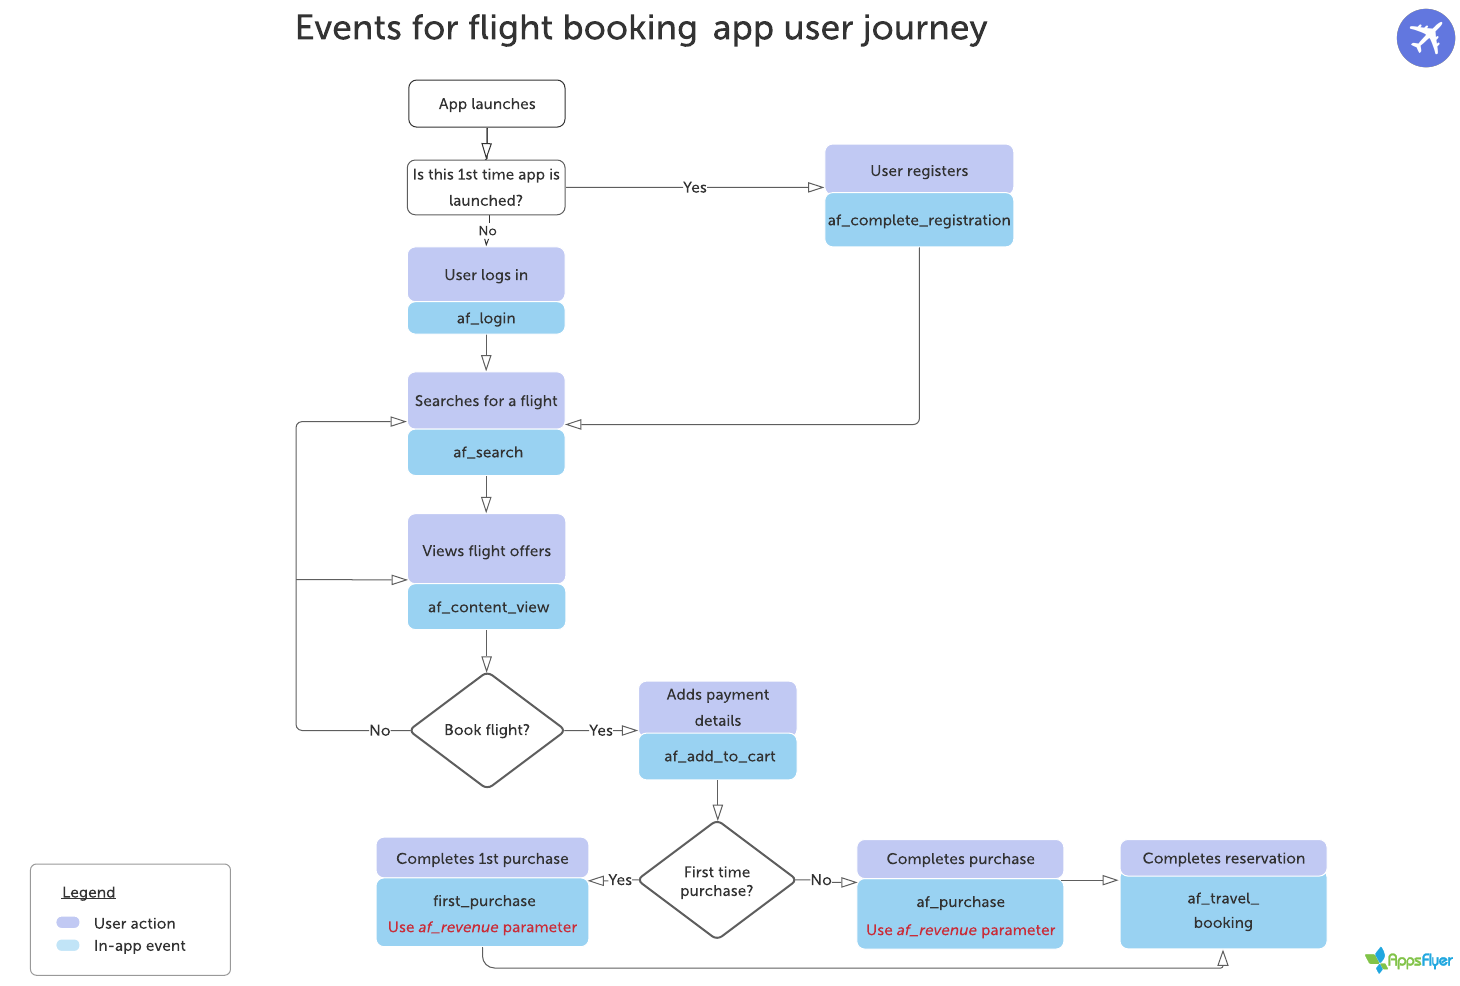 Flowchart_for_recommended_events flight_booking_app_user_journey